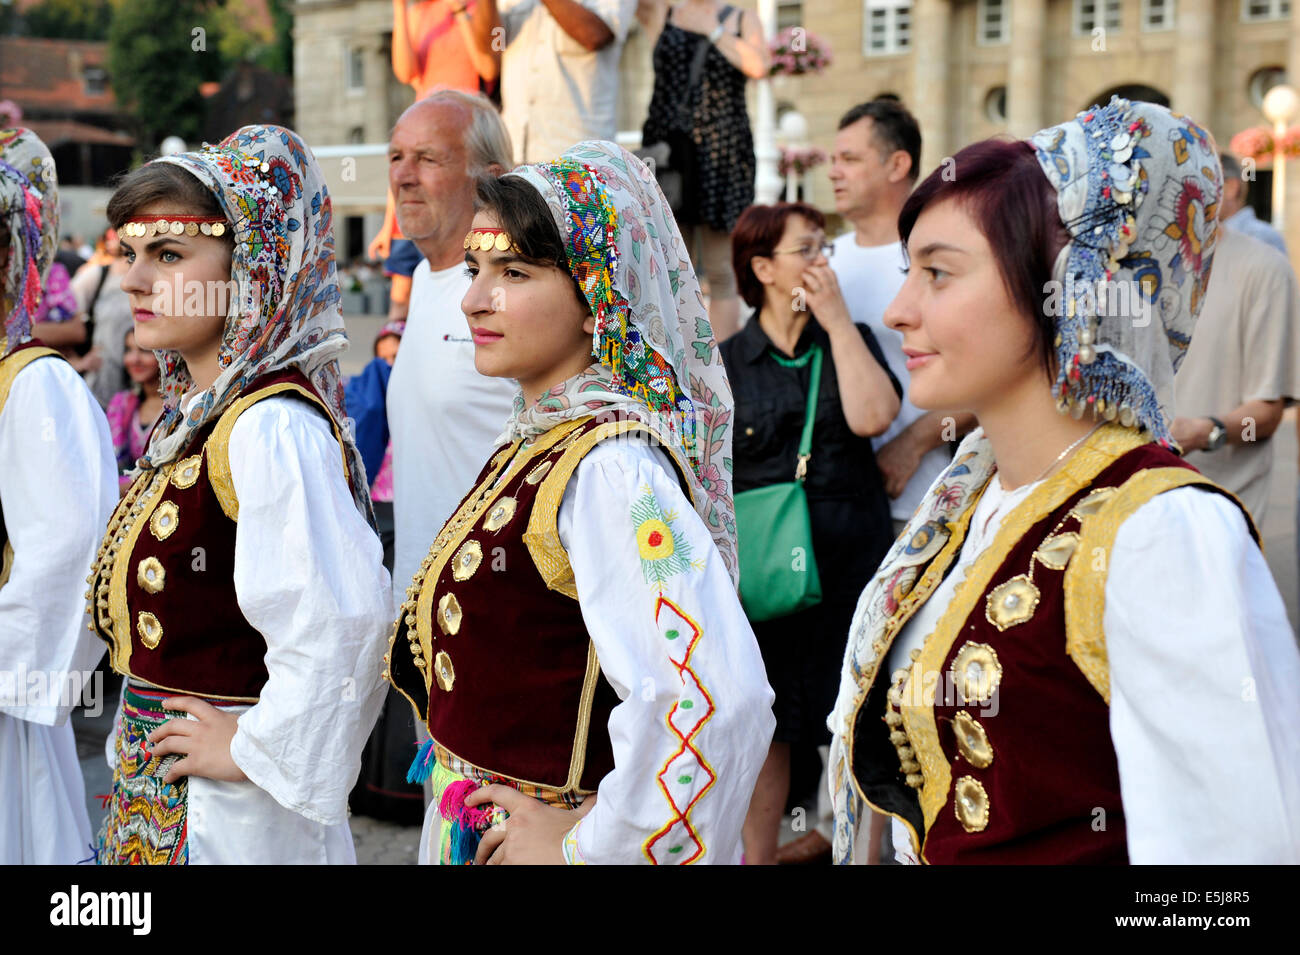 Members of folk group Albanian Culture Society from Cegrane, Macedonia ...